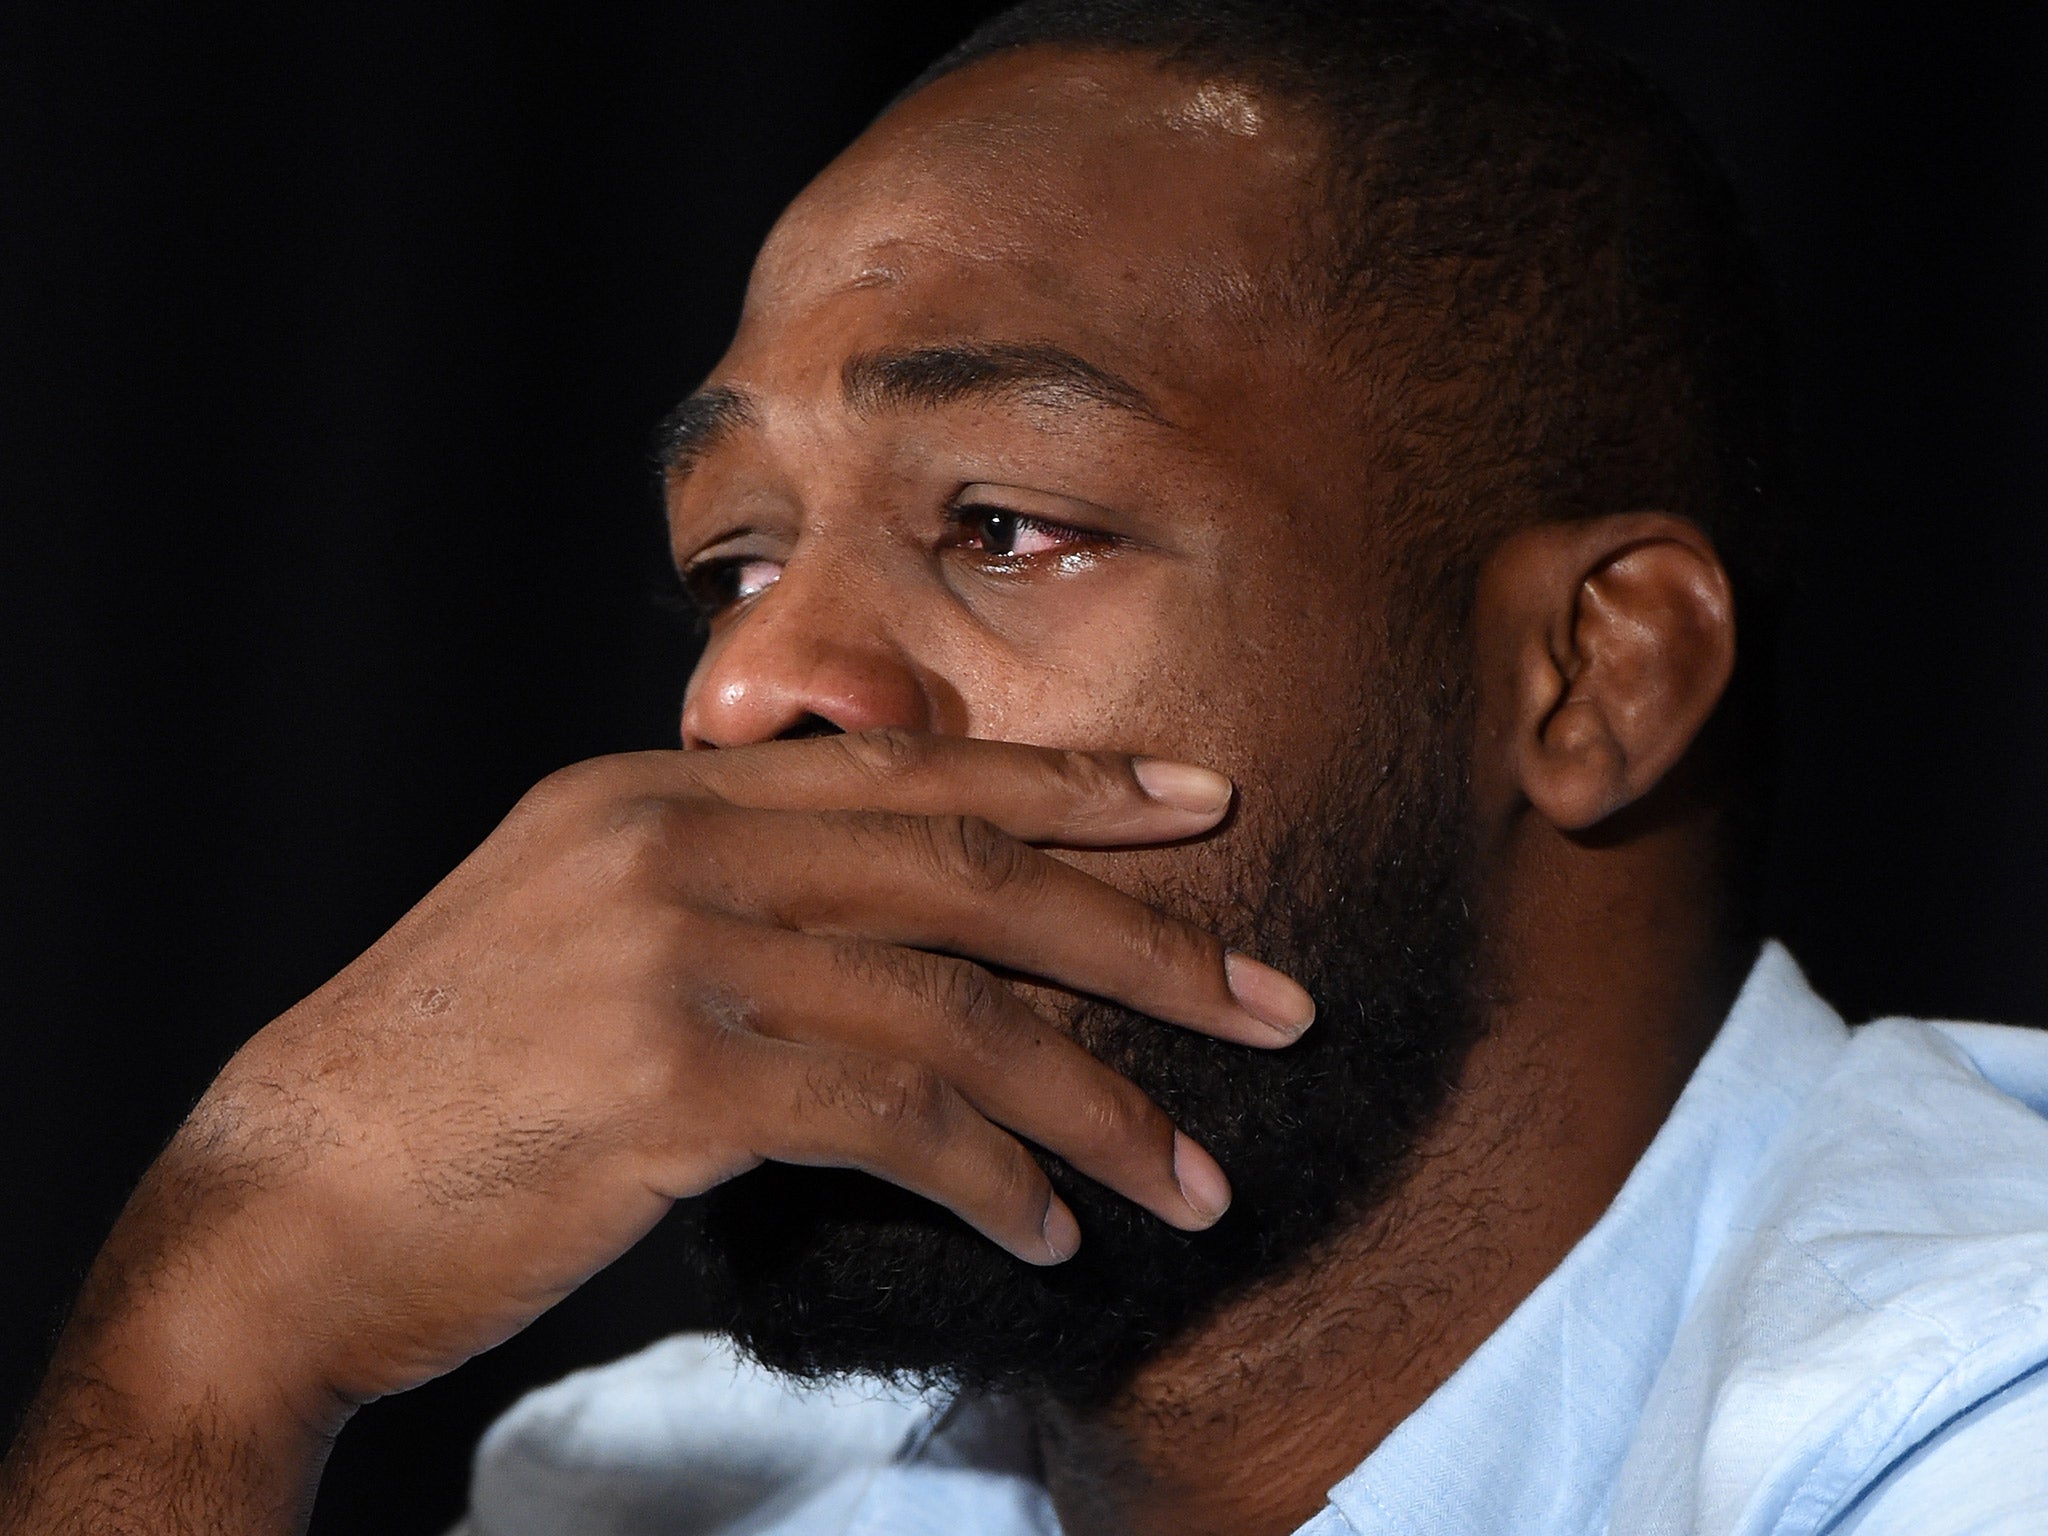 Jon Jones gave a tearful press conference to confirm his failed drug test in June